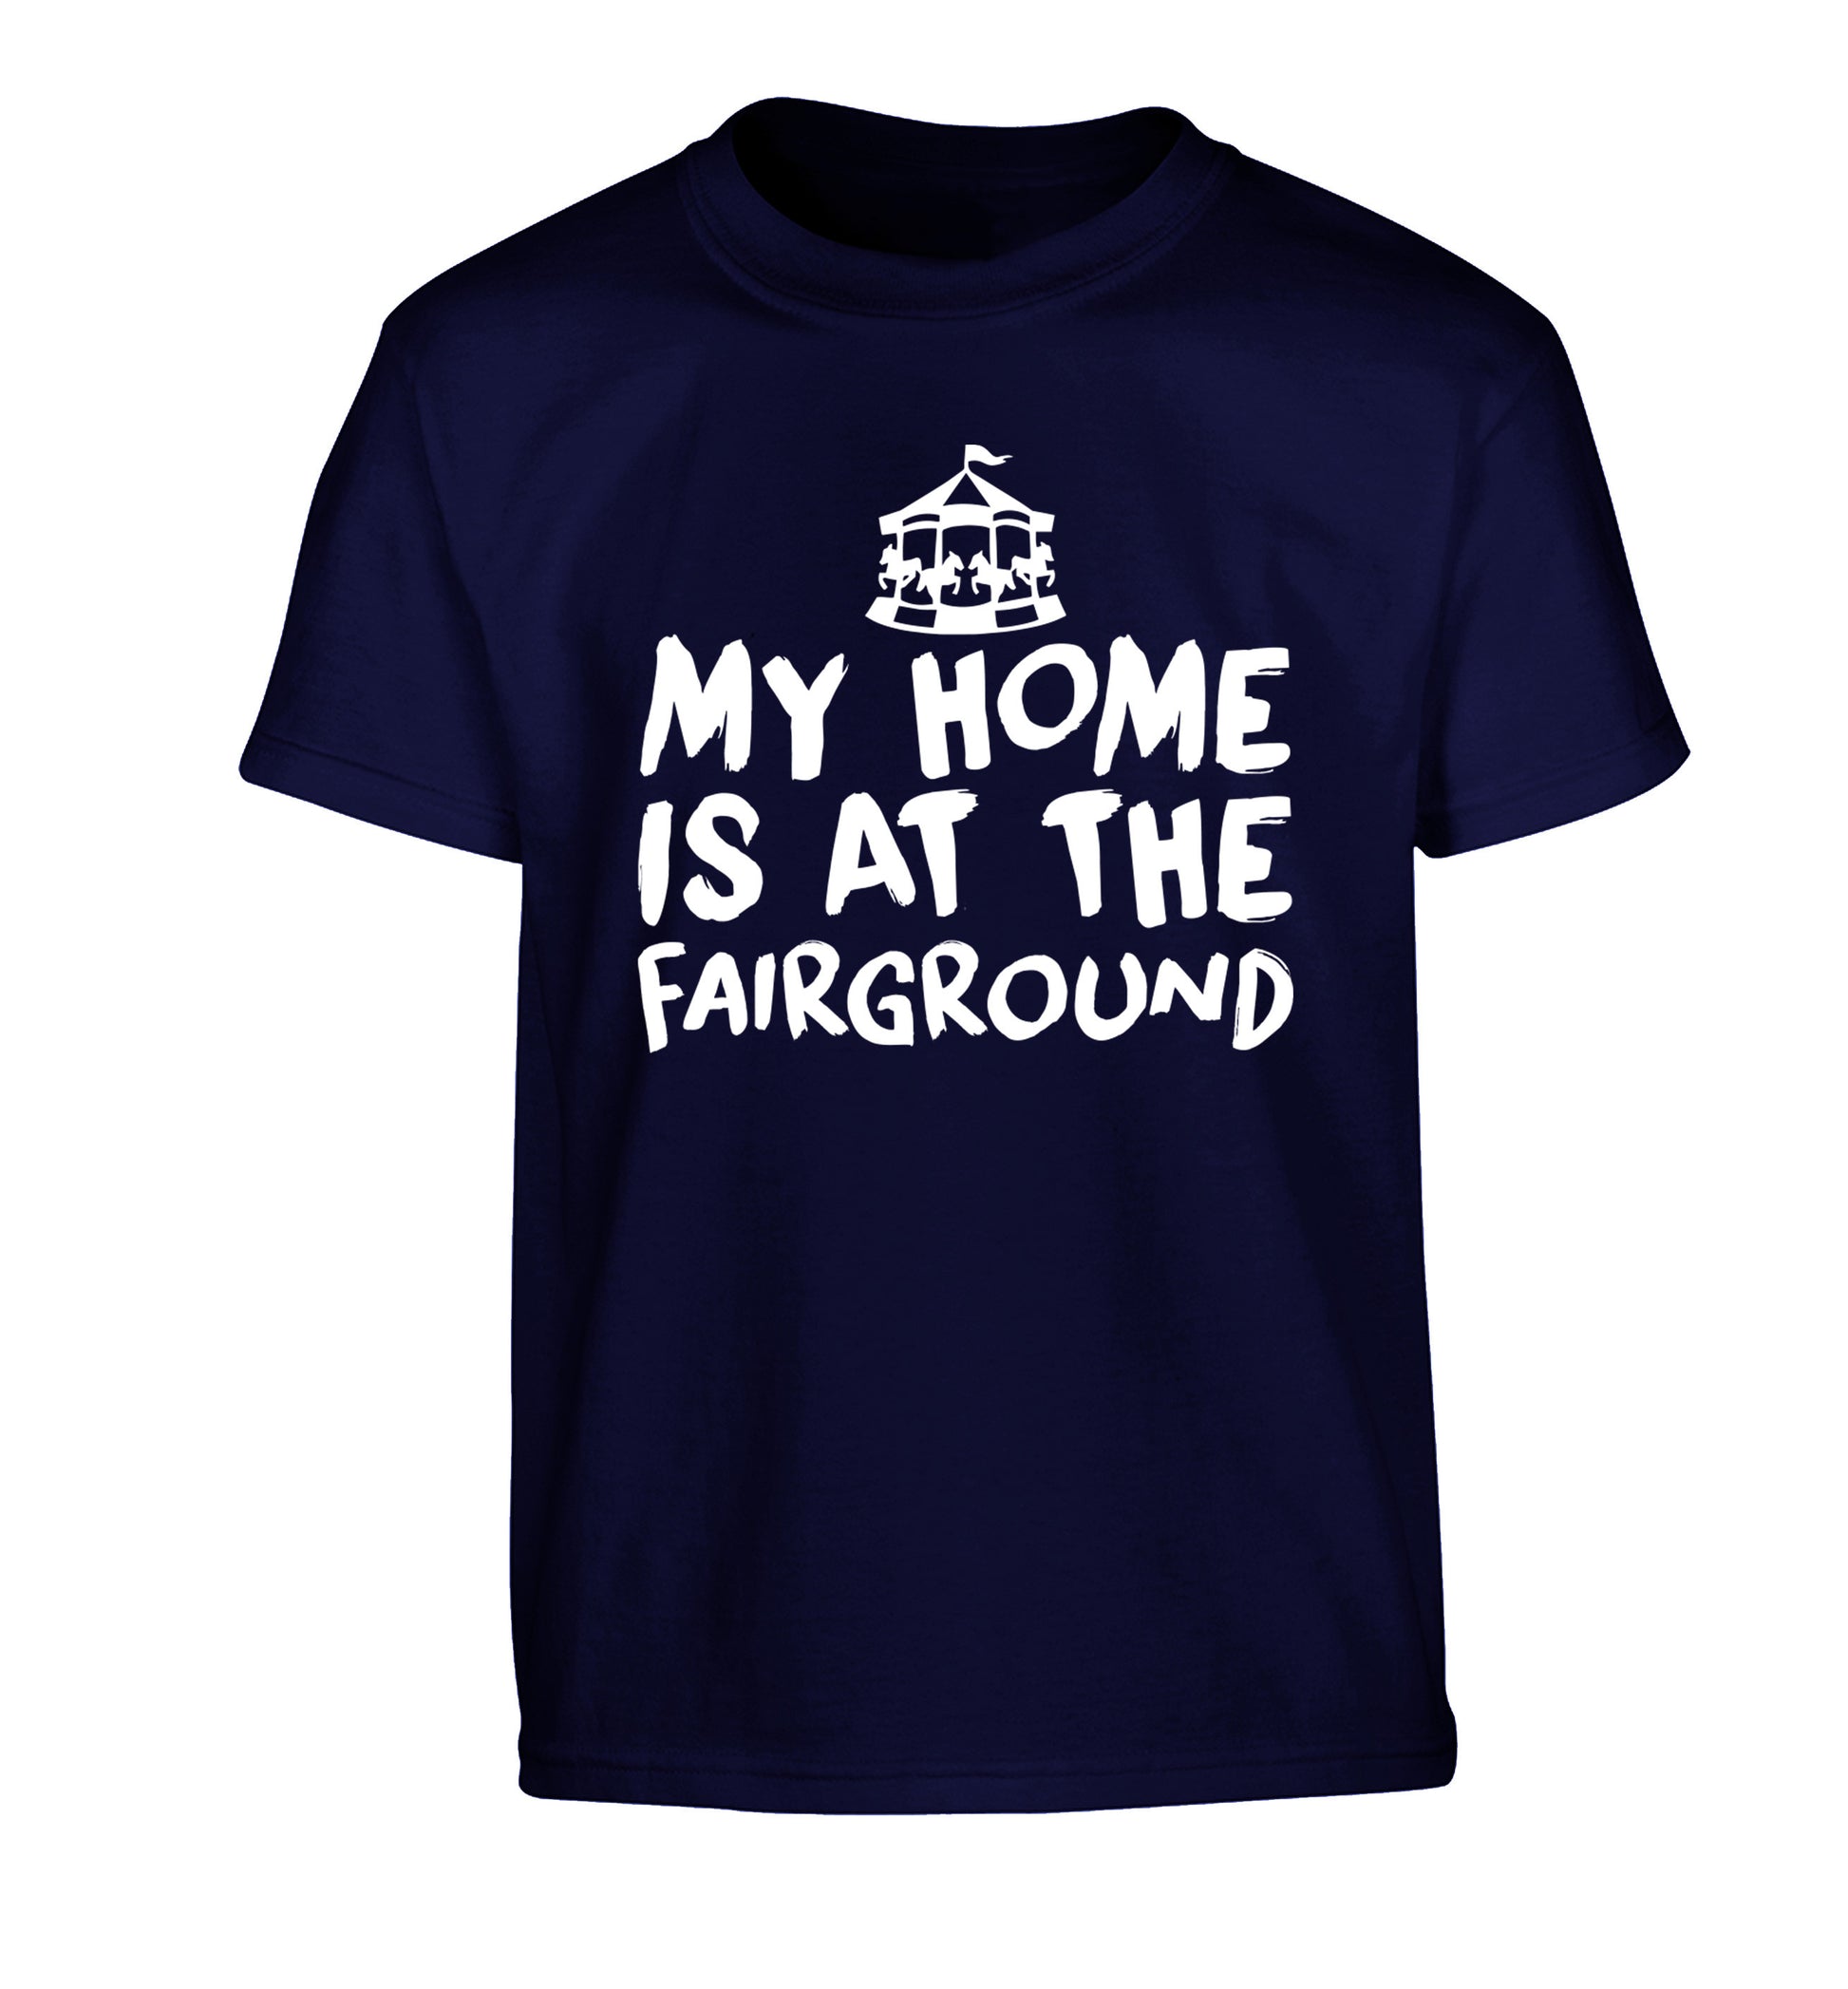 My home is at the fairground Children's navy Tshirt 12-14 Years